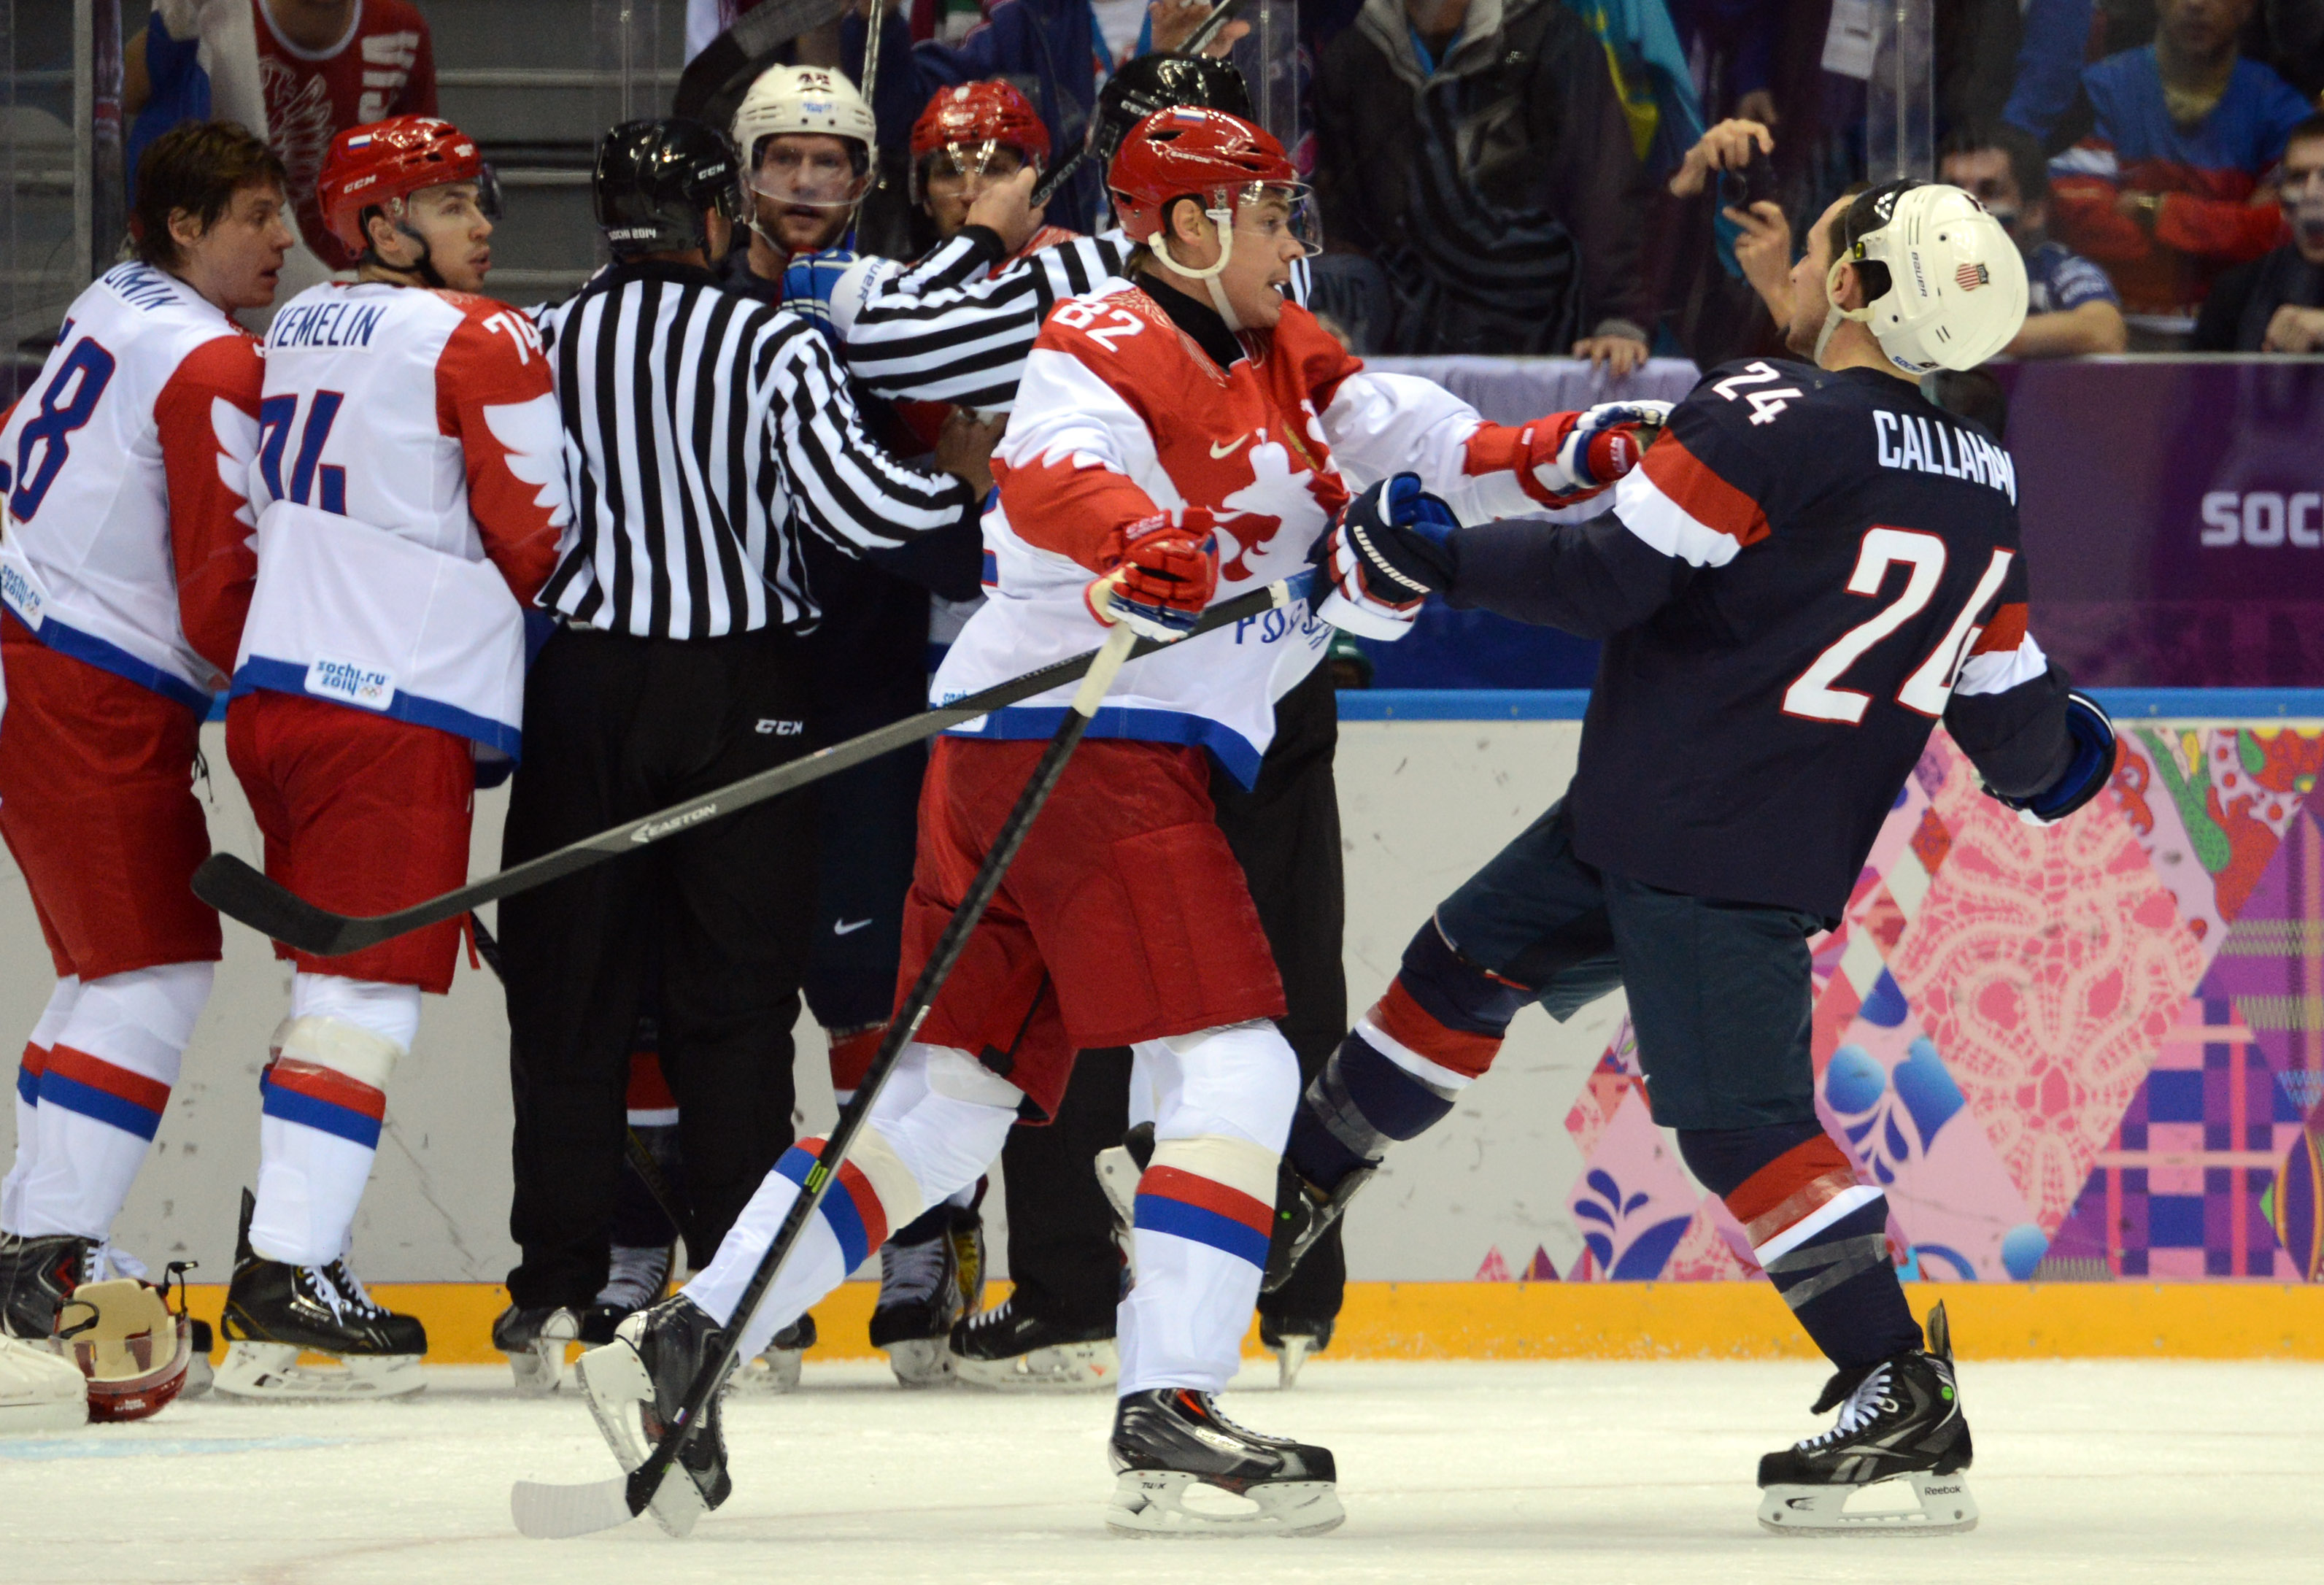 T.J. Oshie the hero as USA outlasts Russia in epic shootout